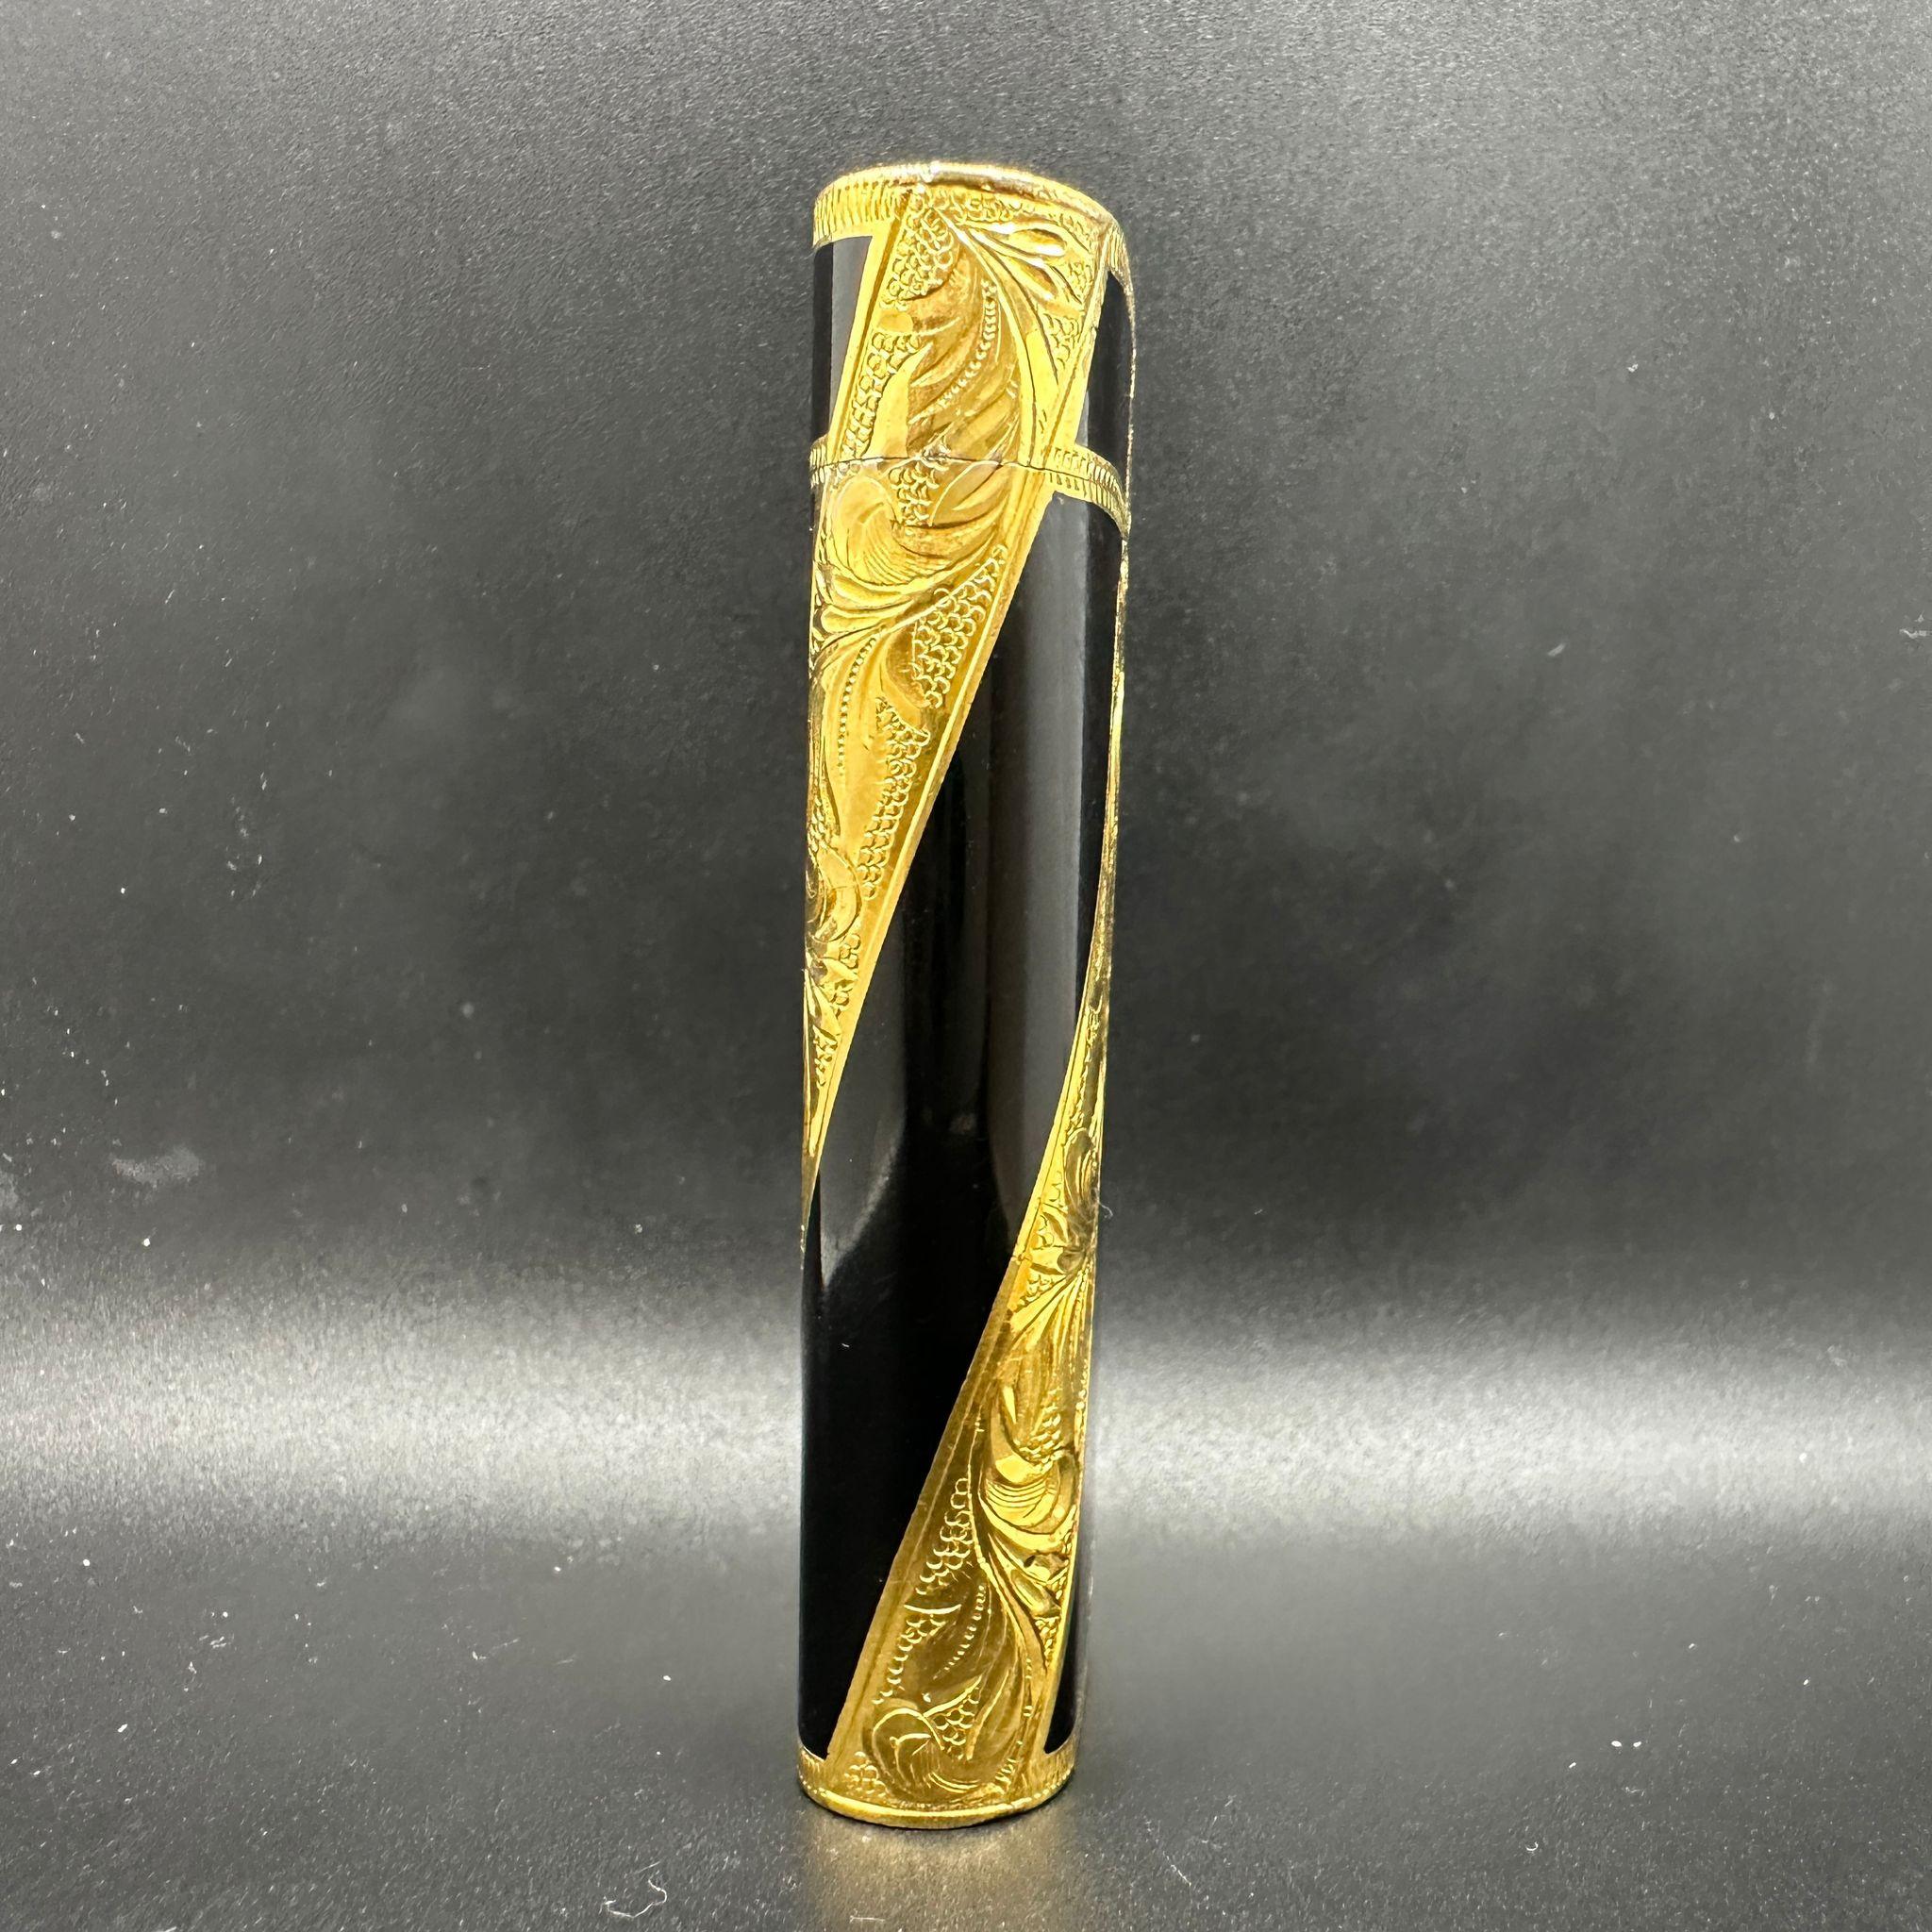 Rare Vintage Cartier circa 1980 18k Gold and Lacquer “Royking” Lighter For Sale 2